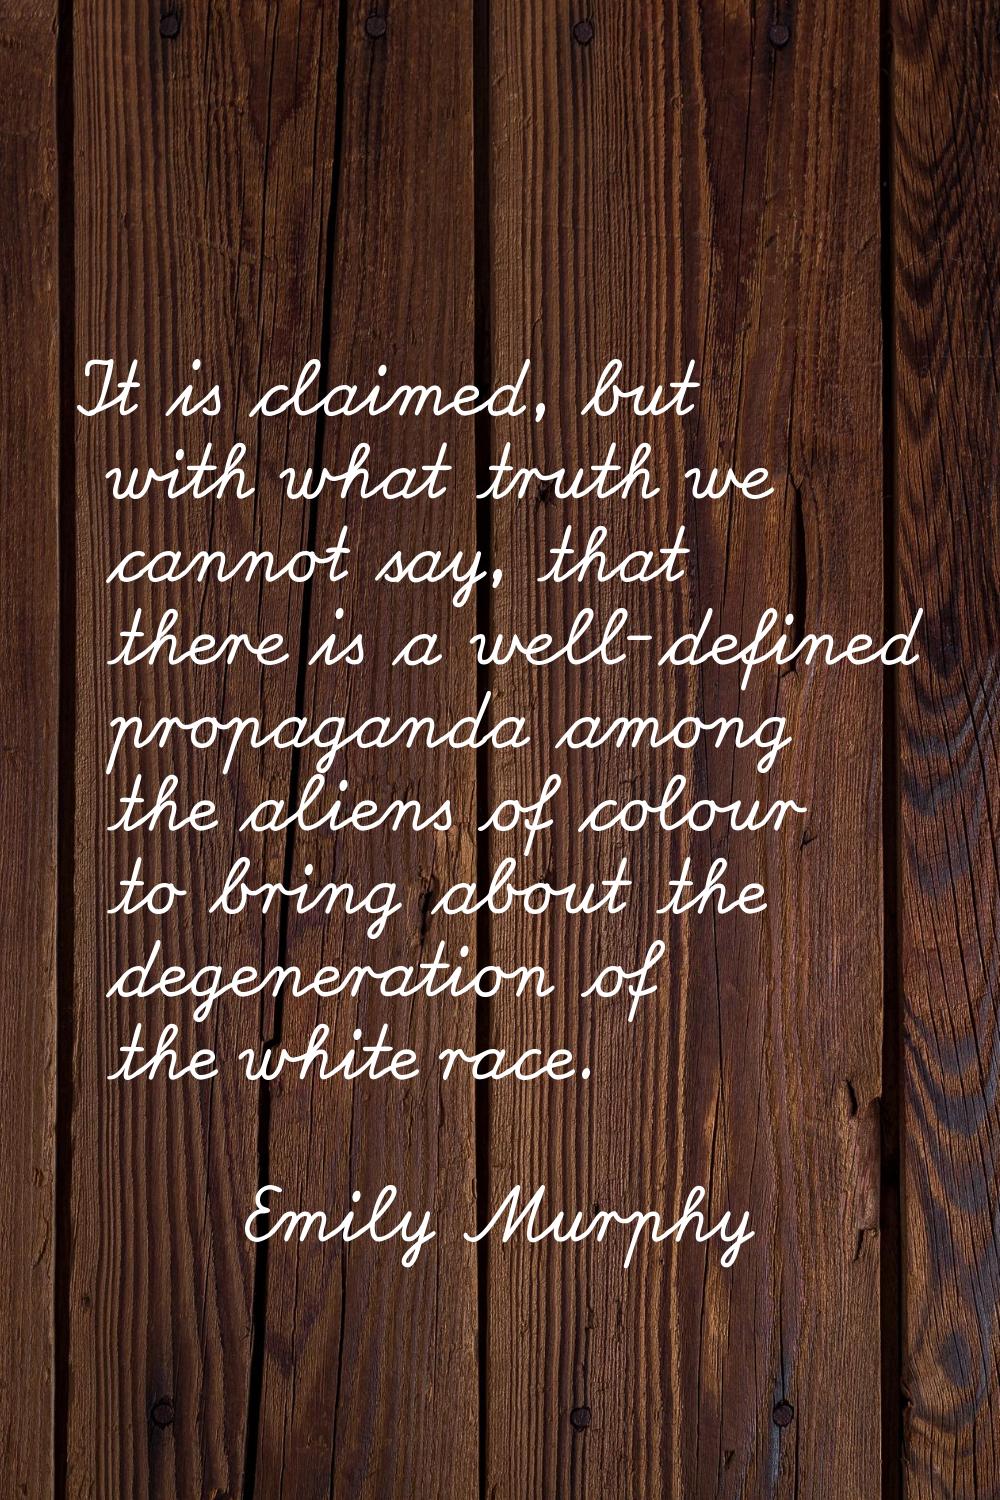 It is claimed, but with what truth we cannot say, that there is a well-defined propaganda among the